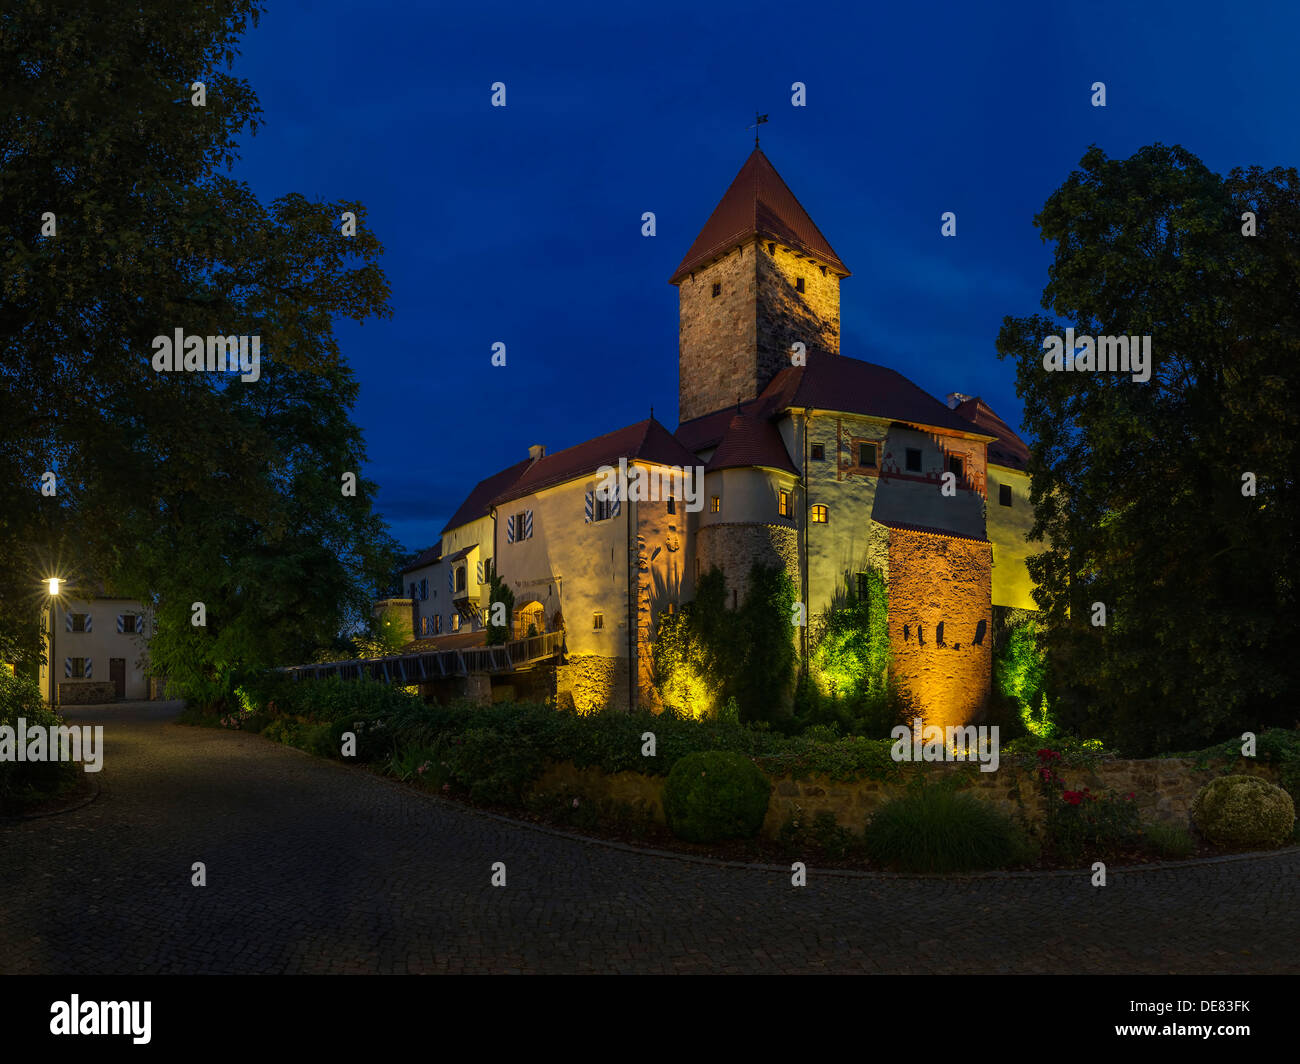 Germany, Bavaria, View of Wernberg castle at night Stock Photo